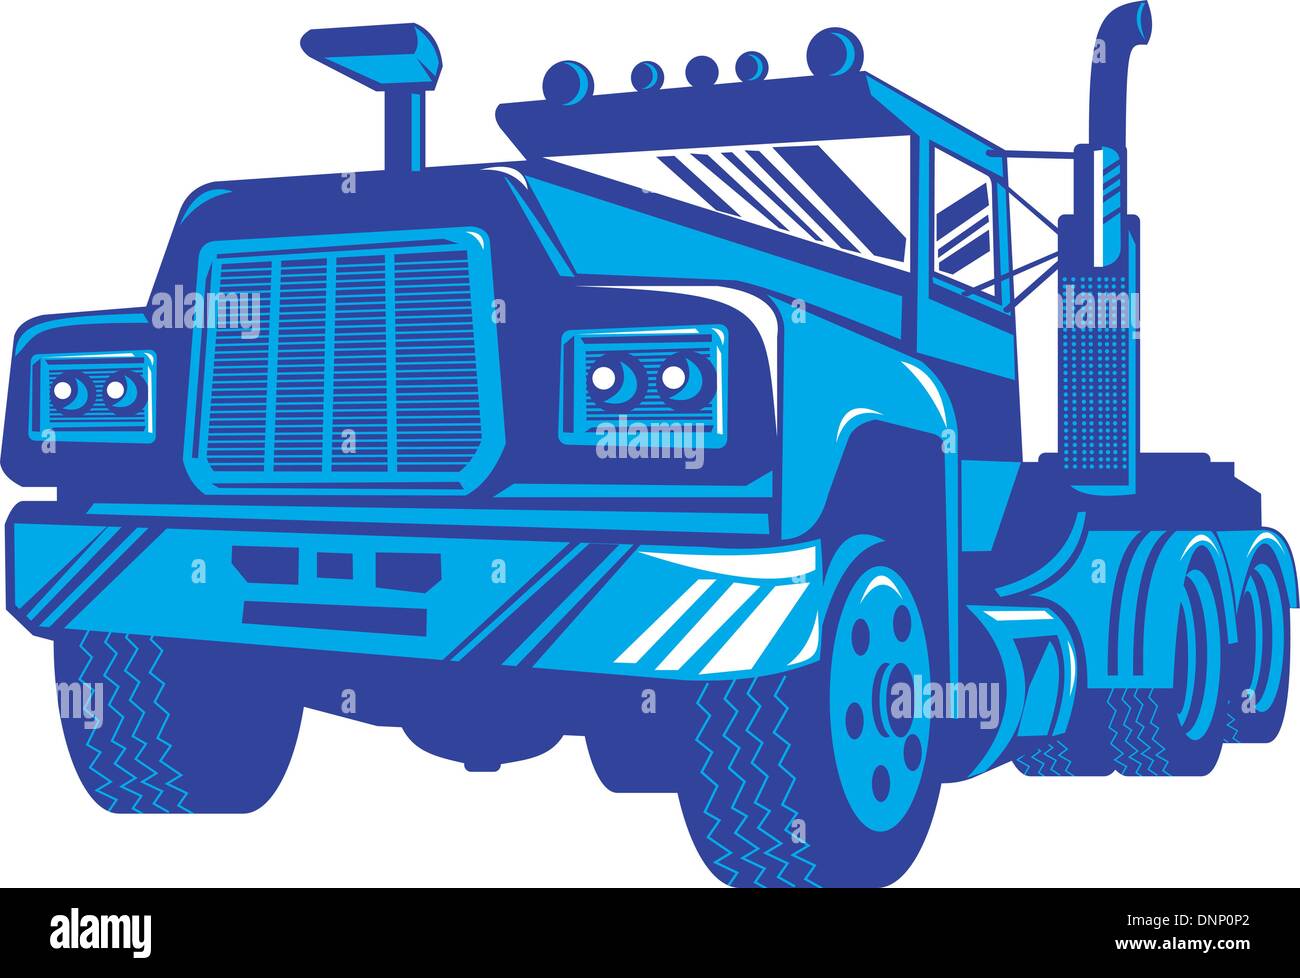 illustration of a container truck lorry done in retro style on isolated background. Stock Vector